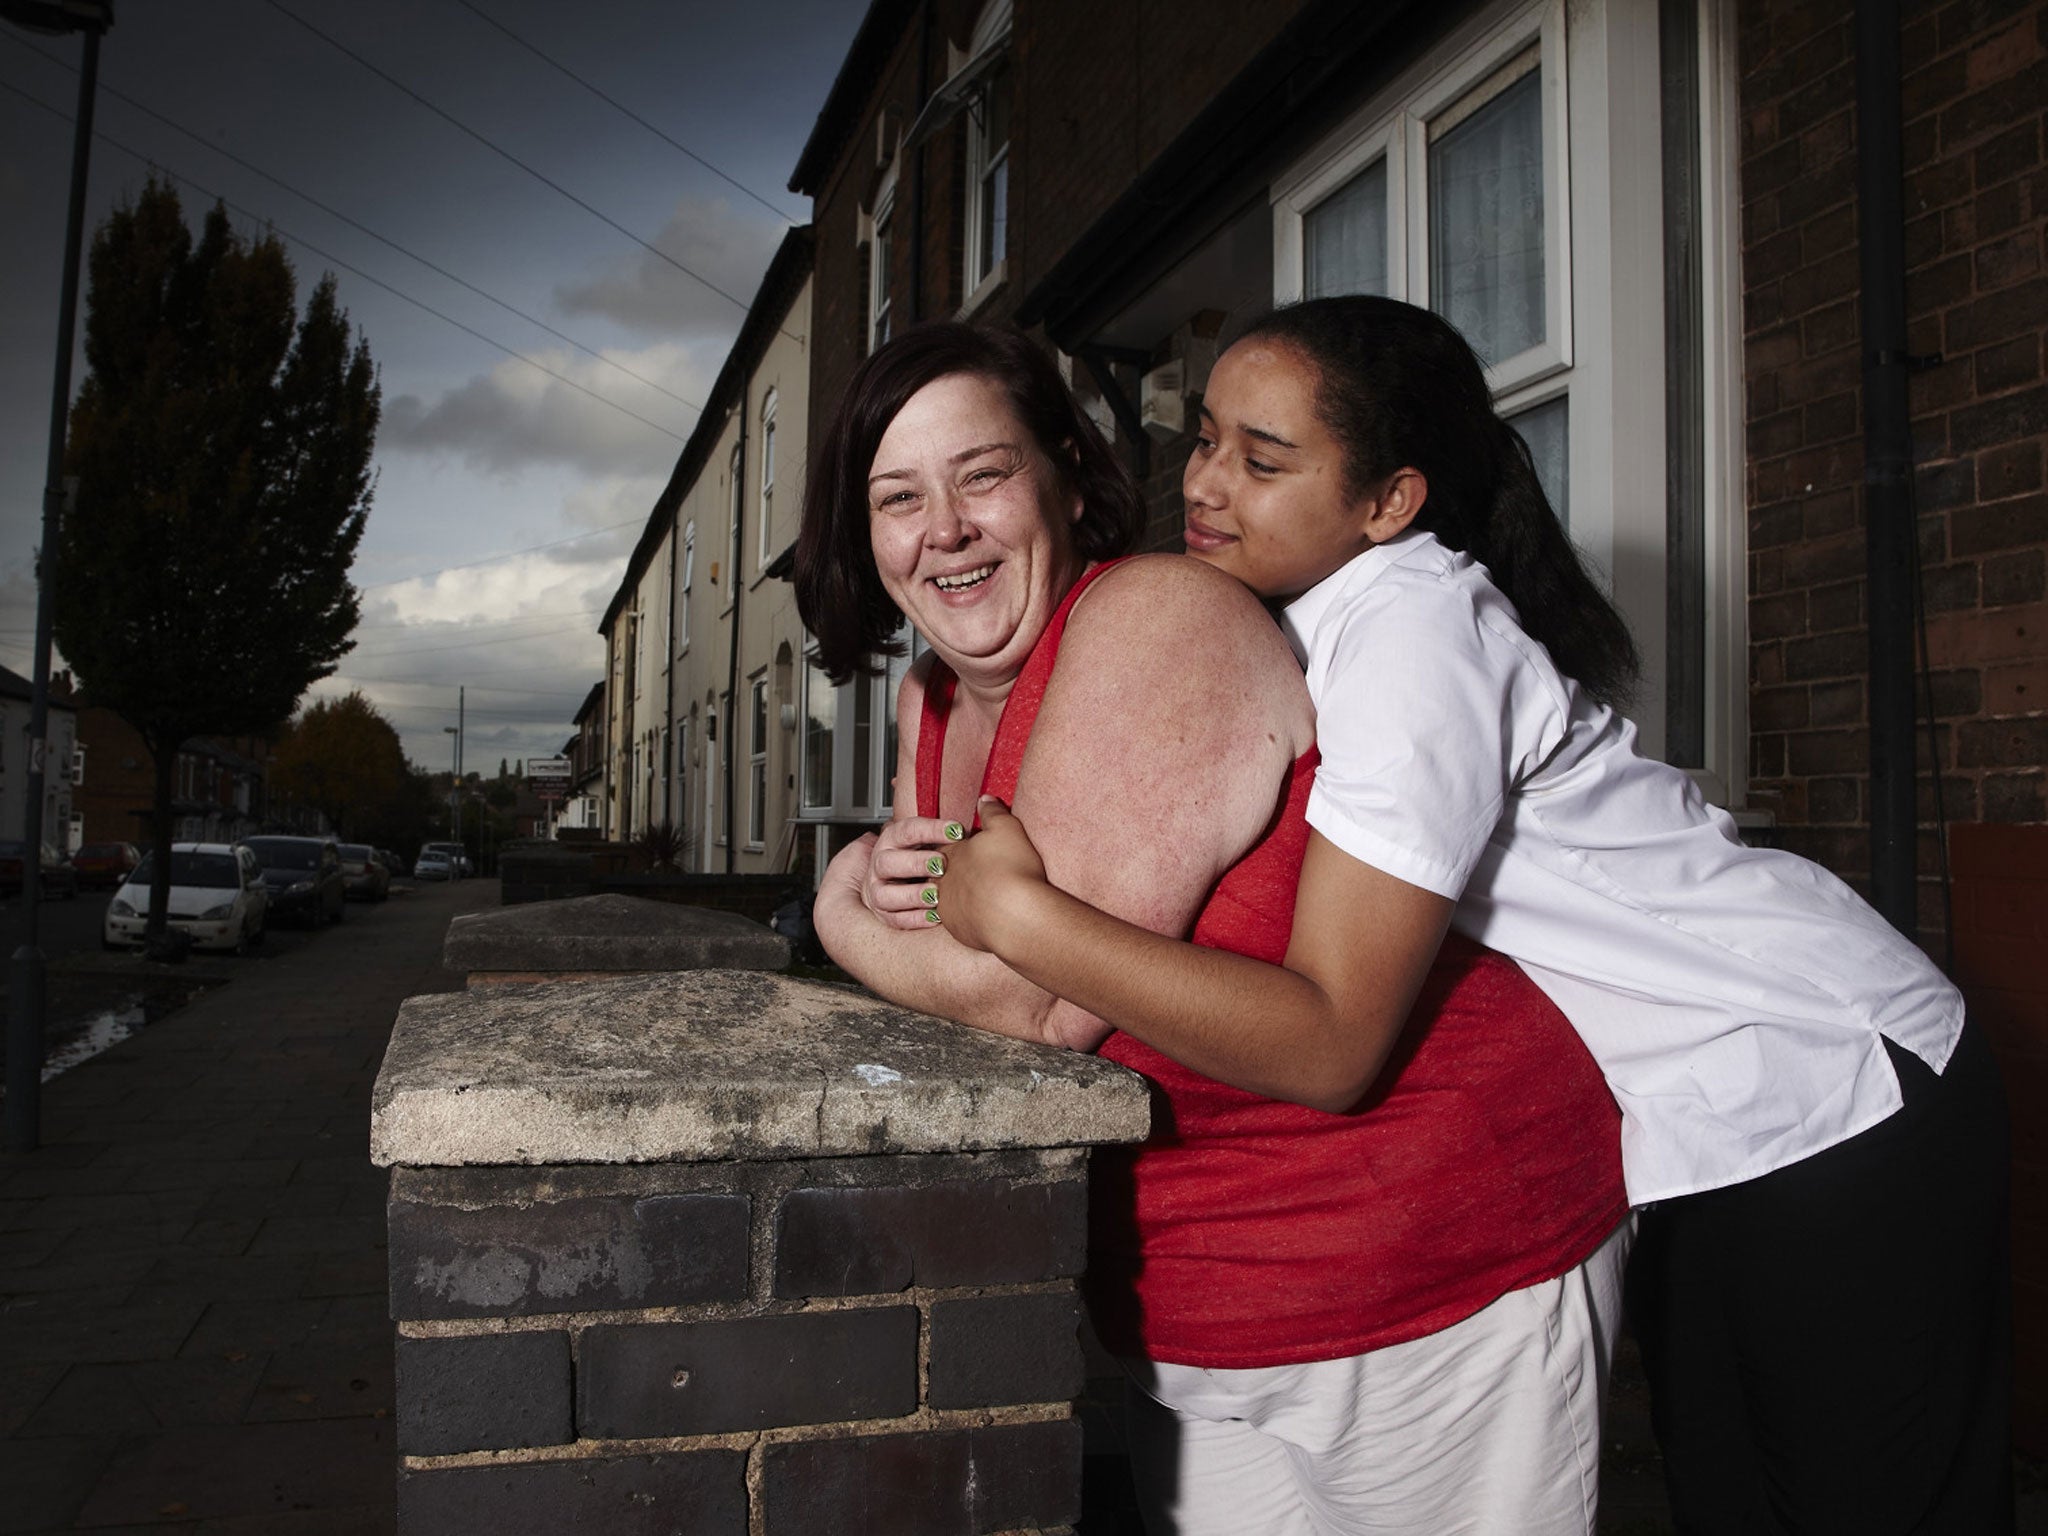 Dee and Caitlin from Channel 4's 'Benefits Street'